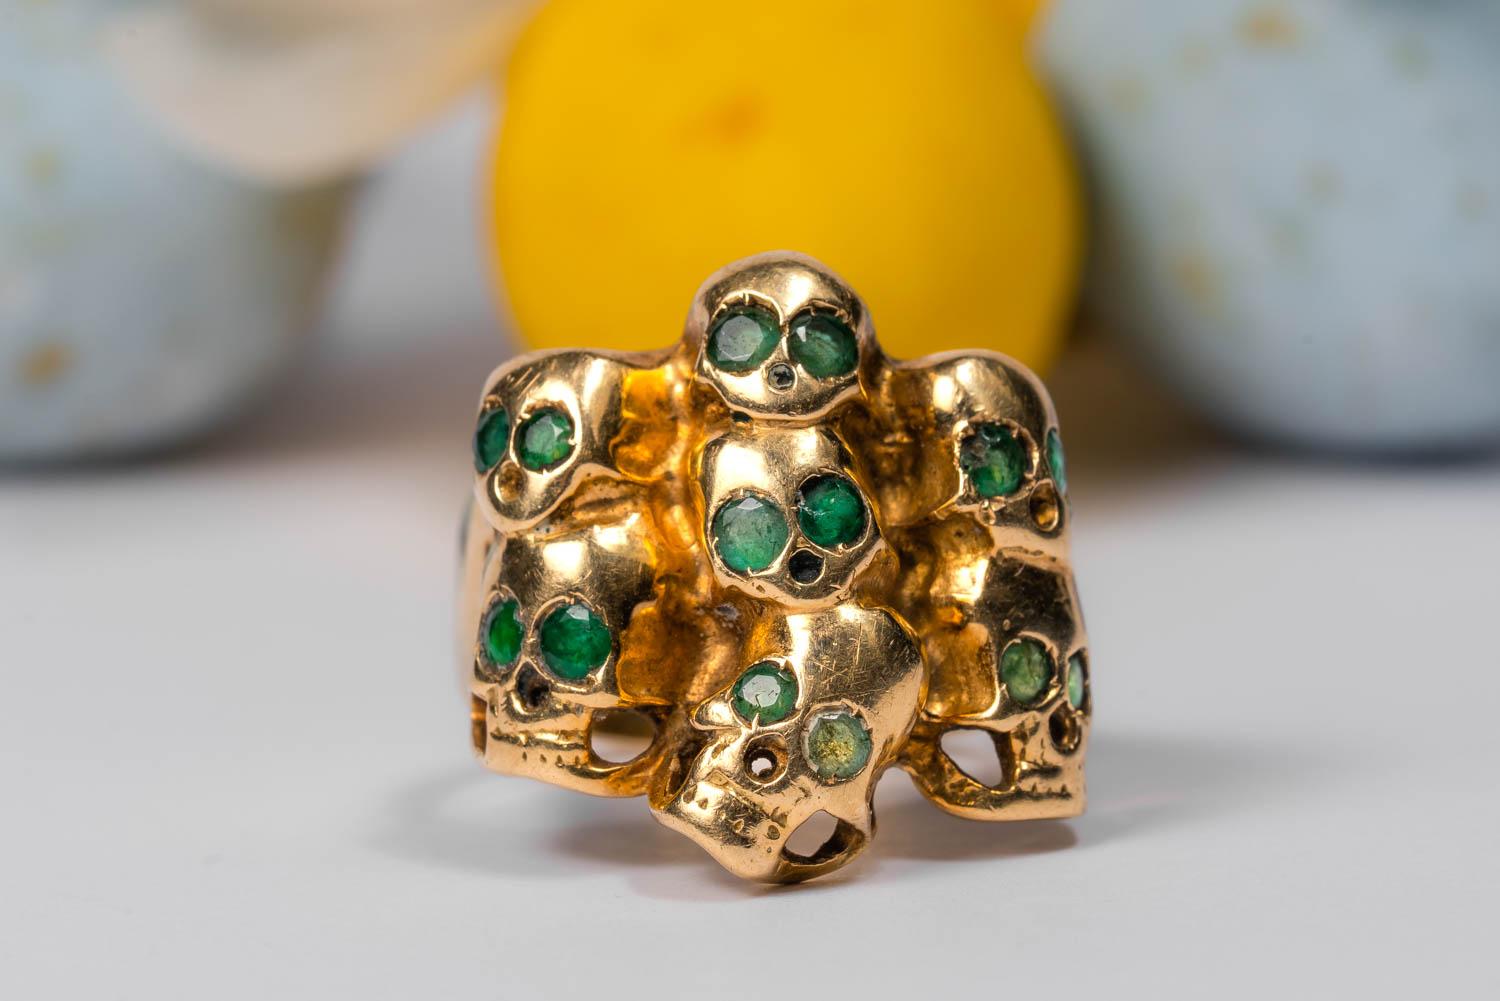 An ultimately naughty, but still somehow nice, solid 14k gold ring.

This massive ring weights almost 10 grams! Its crown measures 0.95 x 0.85 inches and is set with 9 skulls. Each skull has sparkling emerald eyes and look very